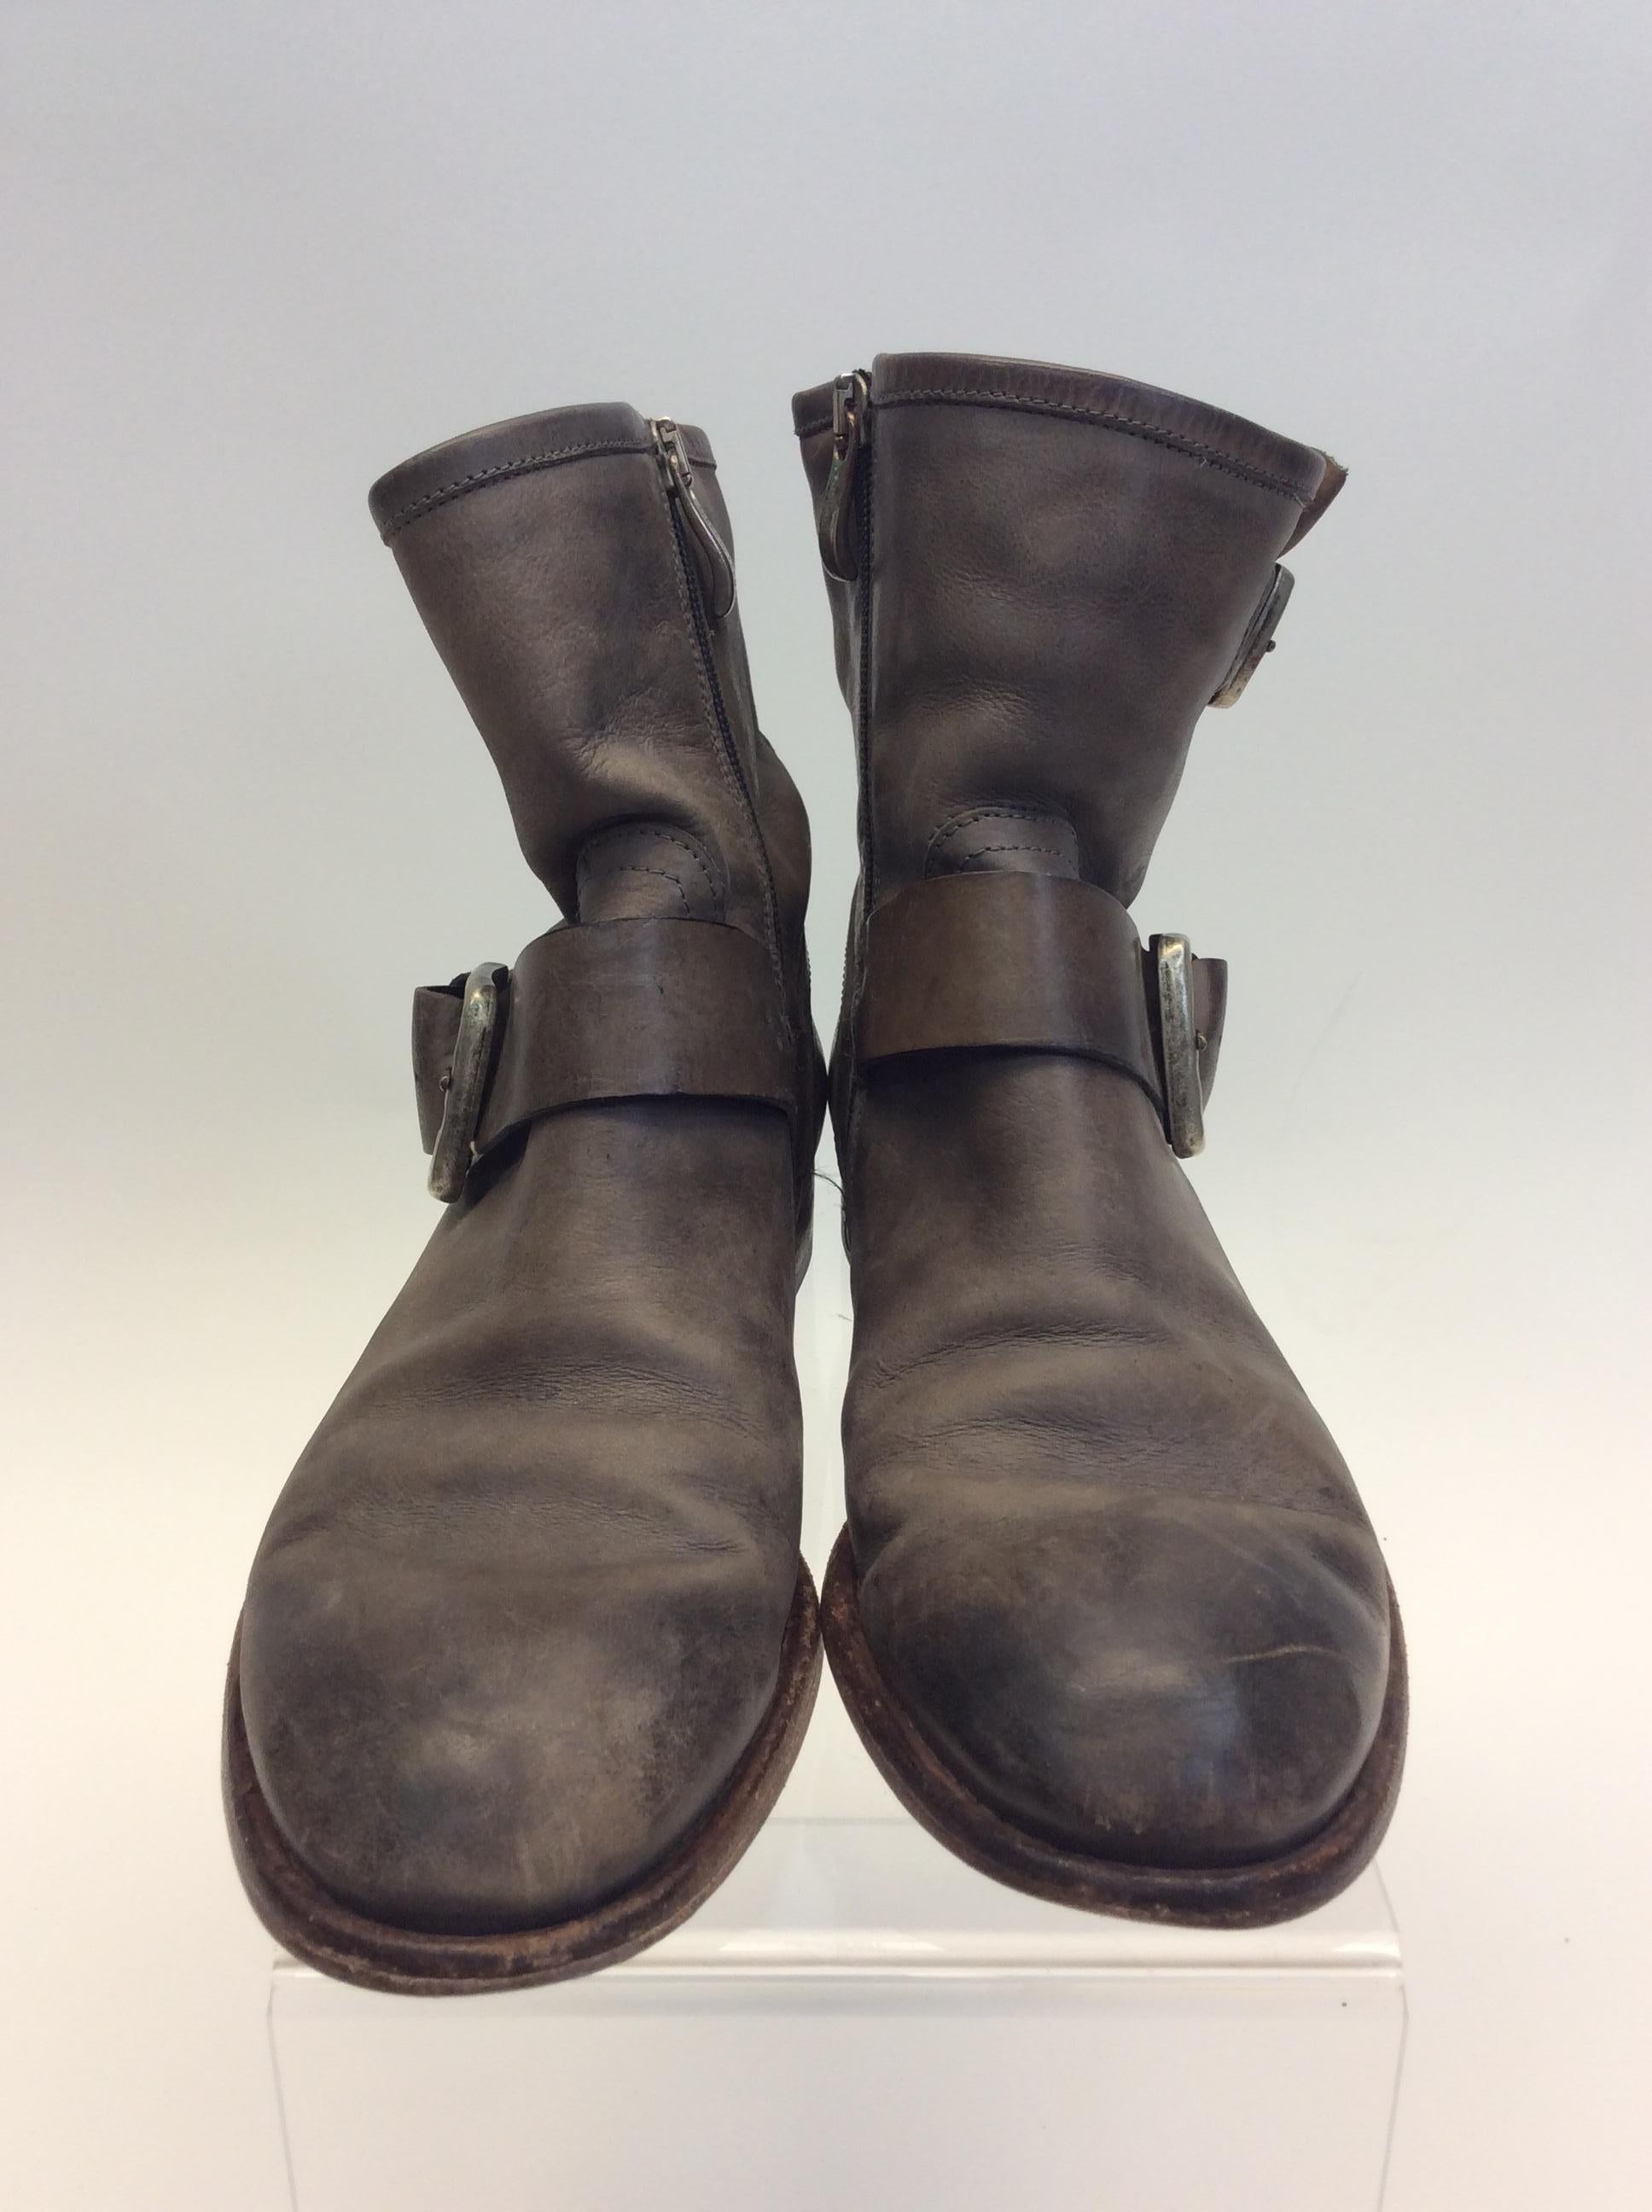 Alberto Fermani Brown Leather Booties
$150
Made in Italy
Size 36
1